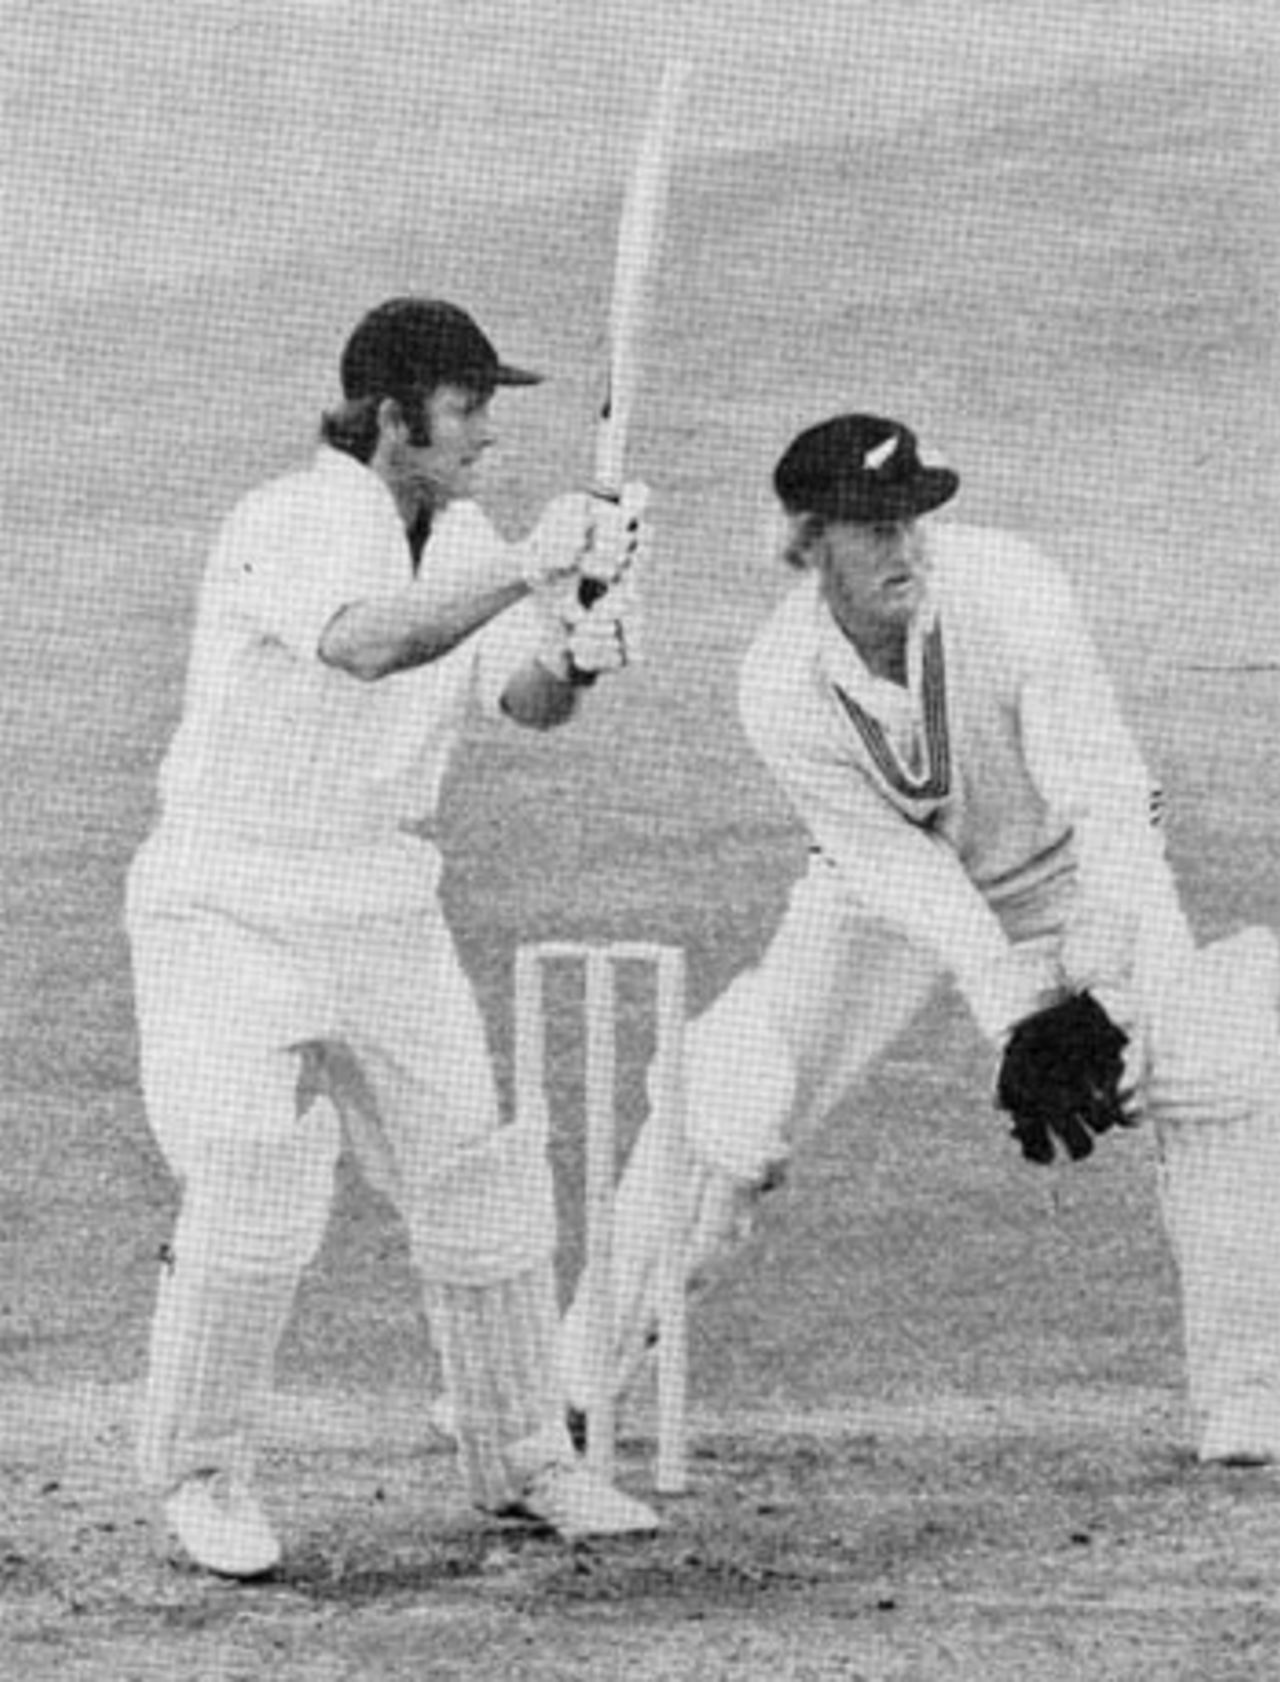 Dennis Amiss on his way to 138 against New Zealand in 1973 with Ken Wadsworth keeping, England v New Zealand, 1st Test, Trent Bridge, June 1973